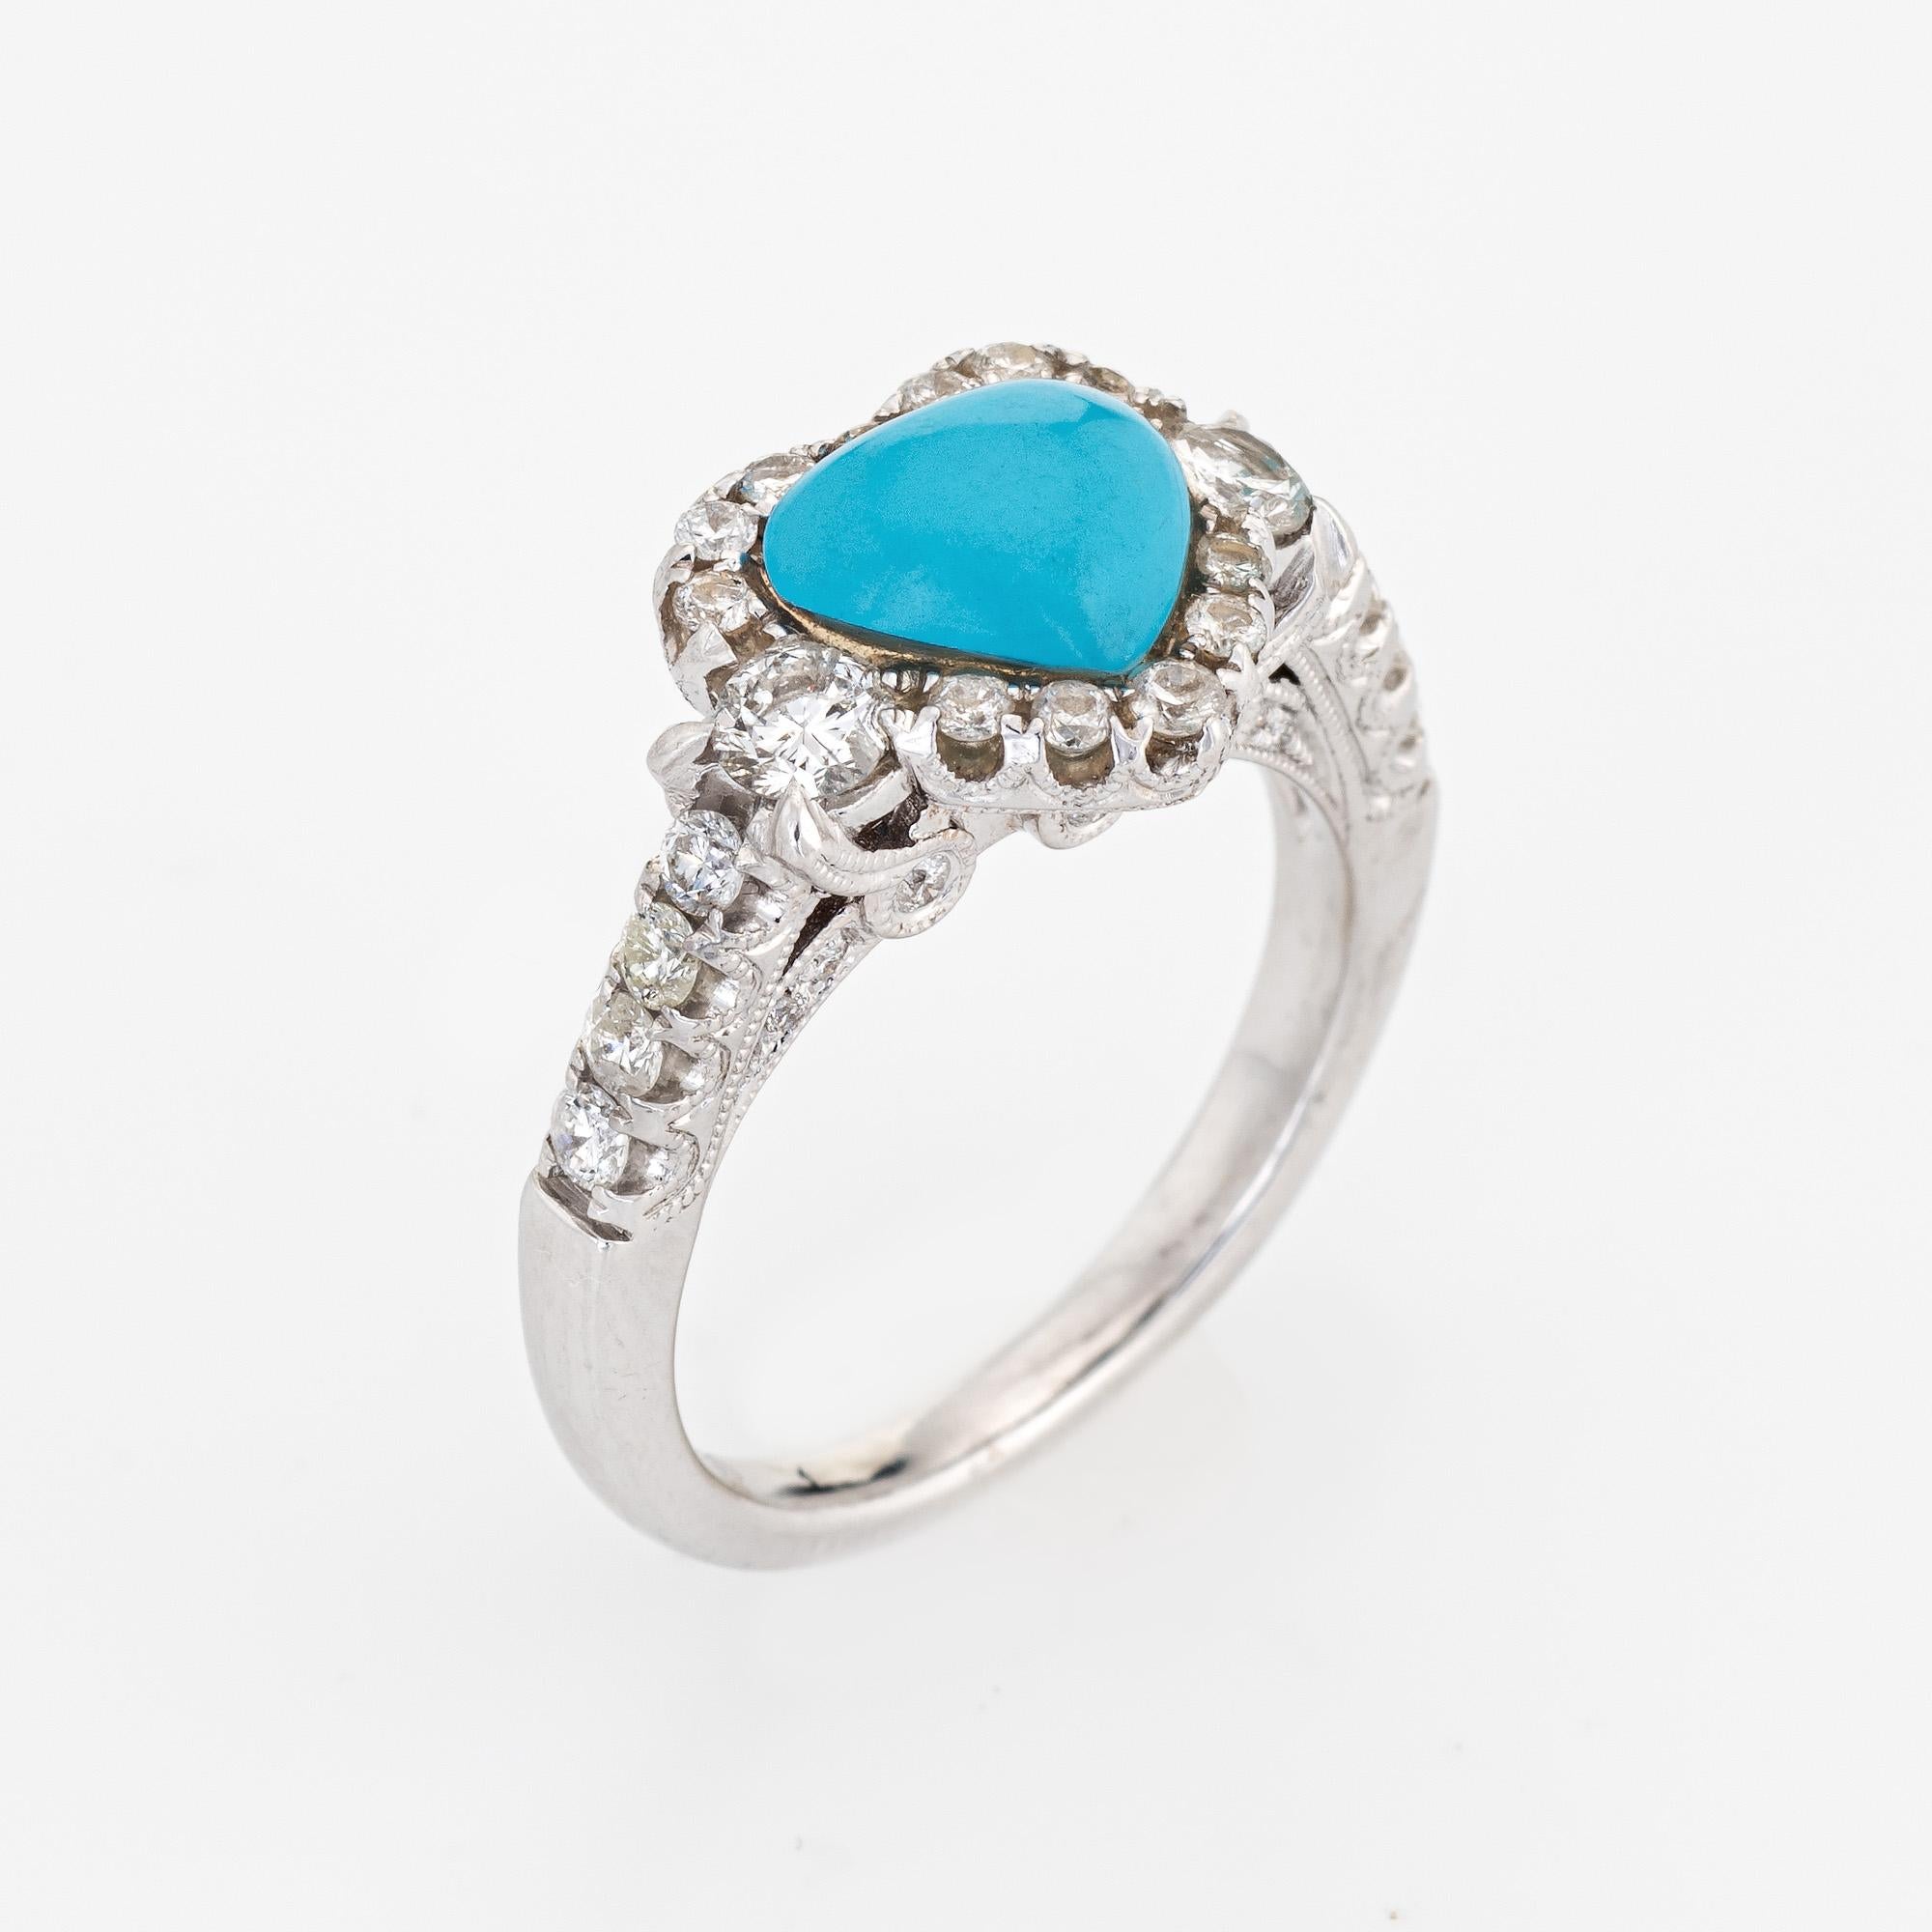 Stylish turquoise & diamond heart ring (circa 2000s) crafted in 18 karat white gold. 

Cabochon cut heart shaped turquoise is estimated at 1.75 carats. Round brilliant cut diamonds total an estimated 1 carat (estimated at H-I color and VS2-SI2